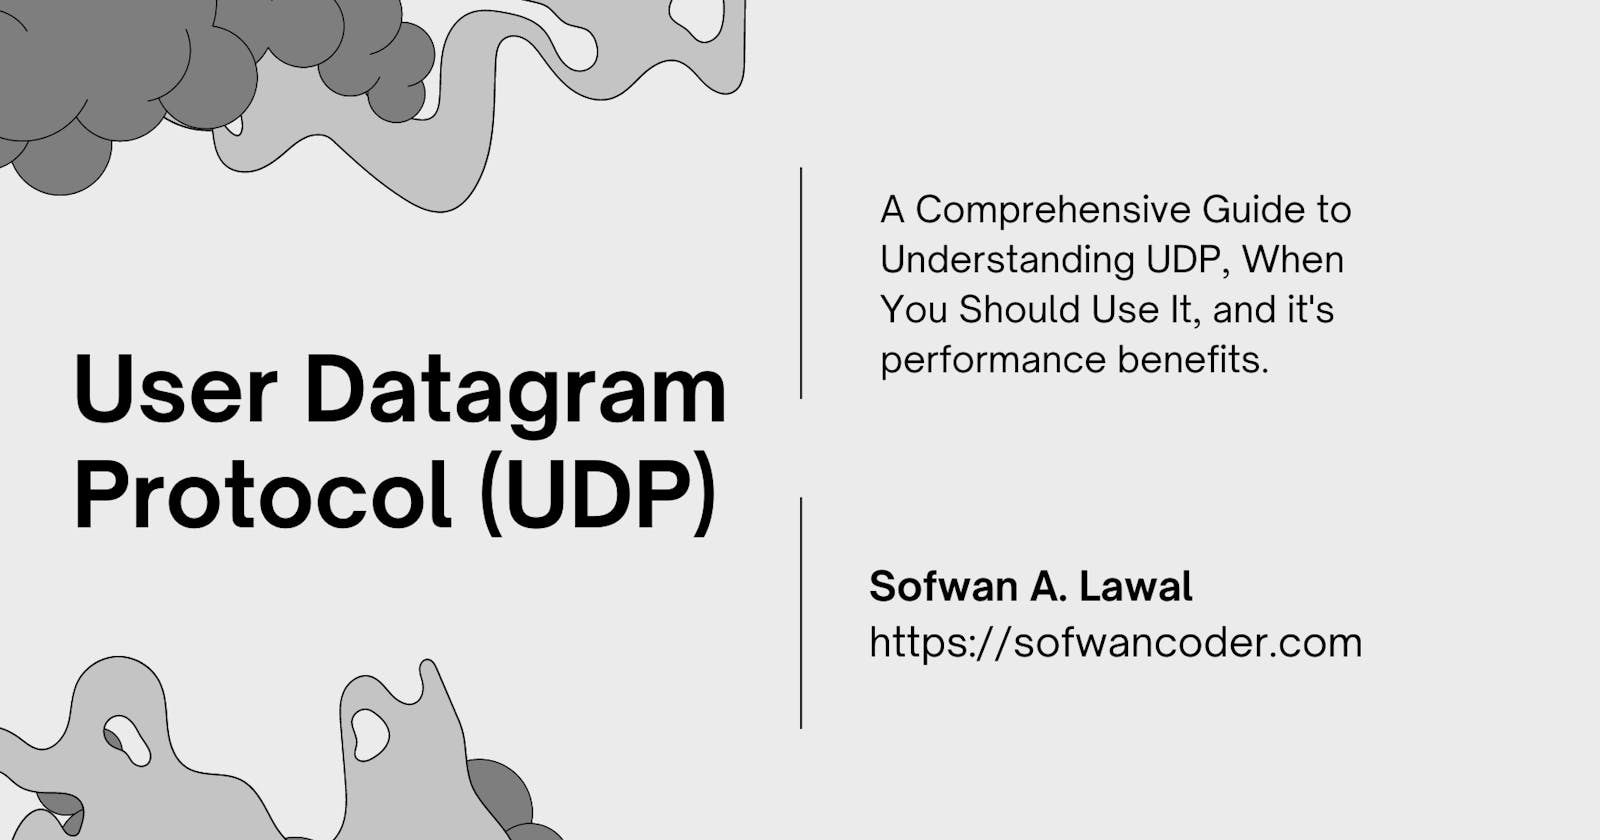 User Datagram Protocol (UDP): How to Use it in the right place, at the right time.